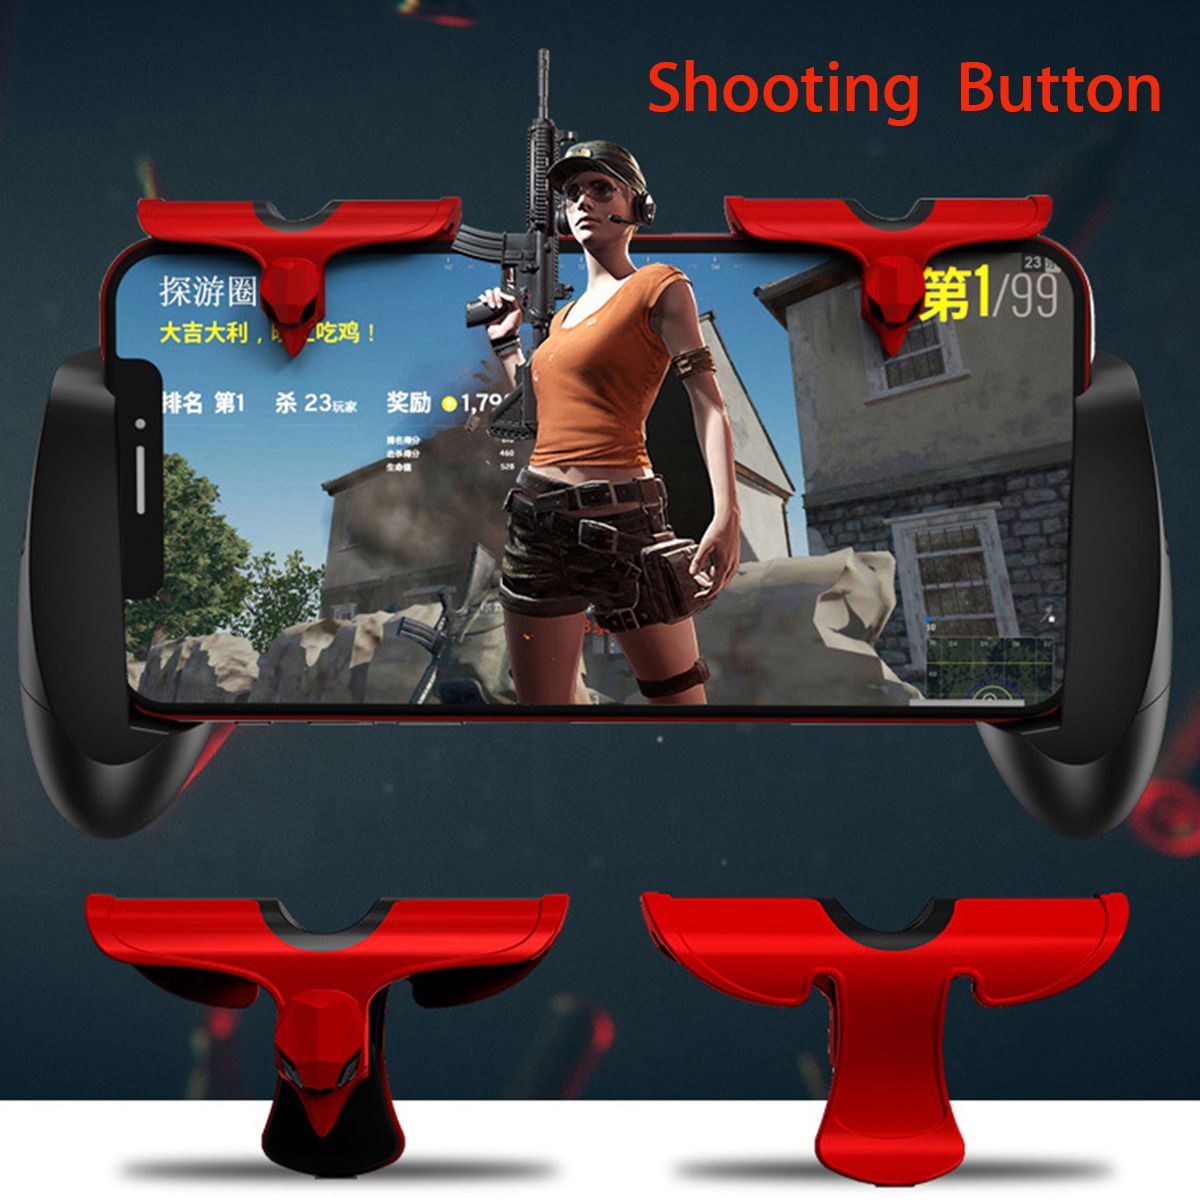 Bakeey-Gaming-Trigger-Shooter-Controller-Touch-Screen-Mobile-Gamepad-Joystick-for-Smartphones-1330557